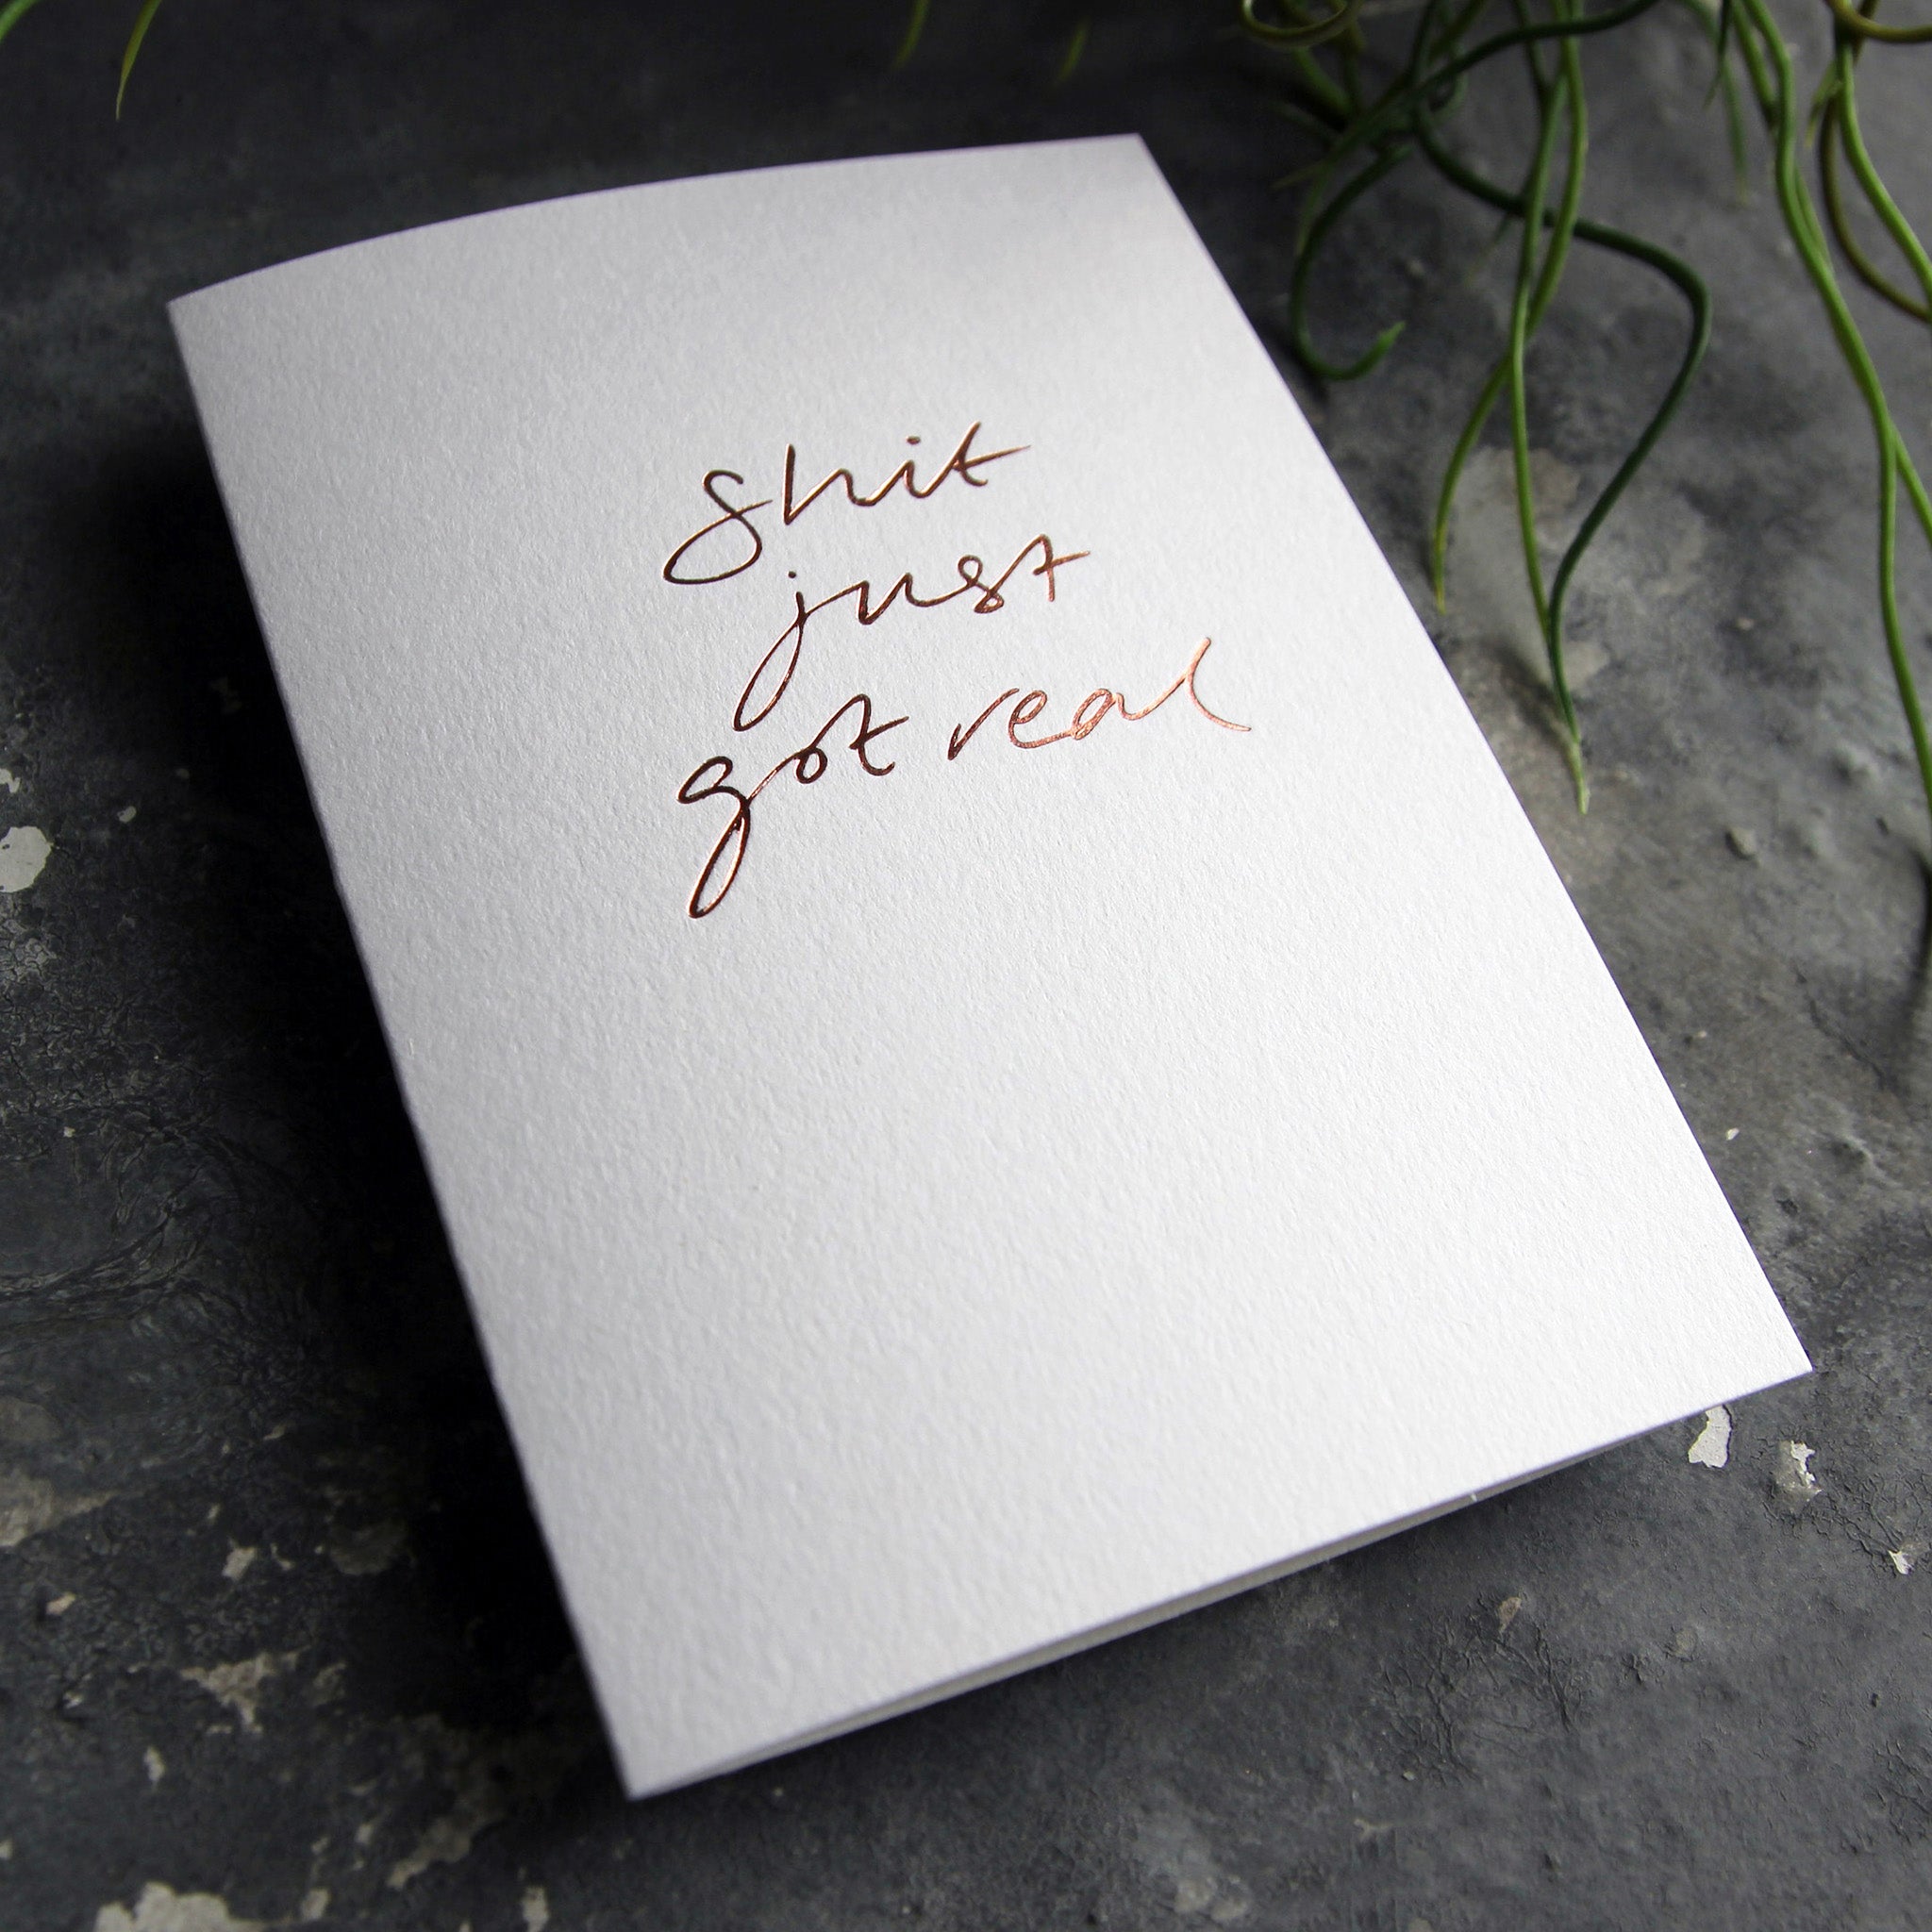 Luxury white greetings card with "Shit Just Got Real" handwritten in the front and hand printed in rose gold foil on a grey background with some green plant leaves at the side.